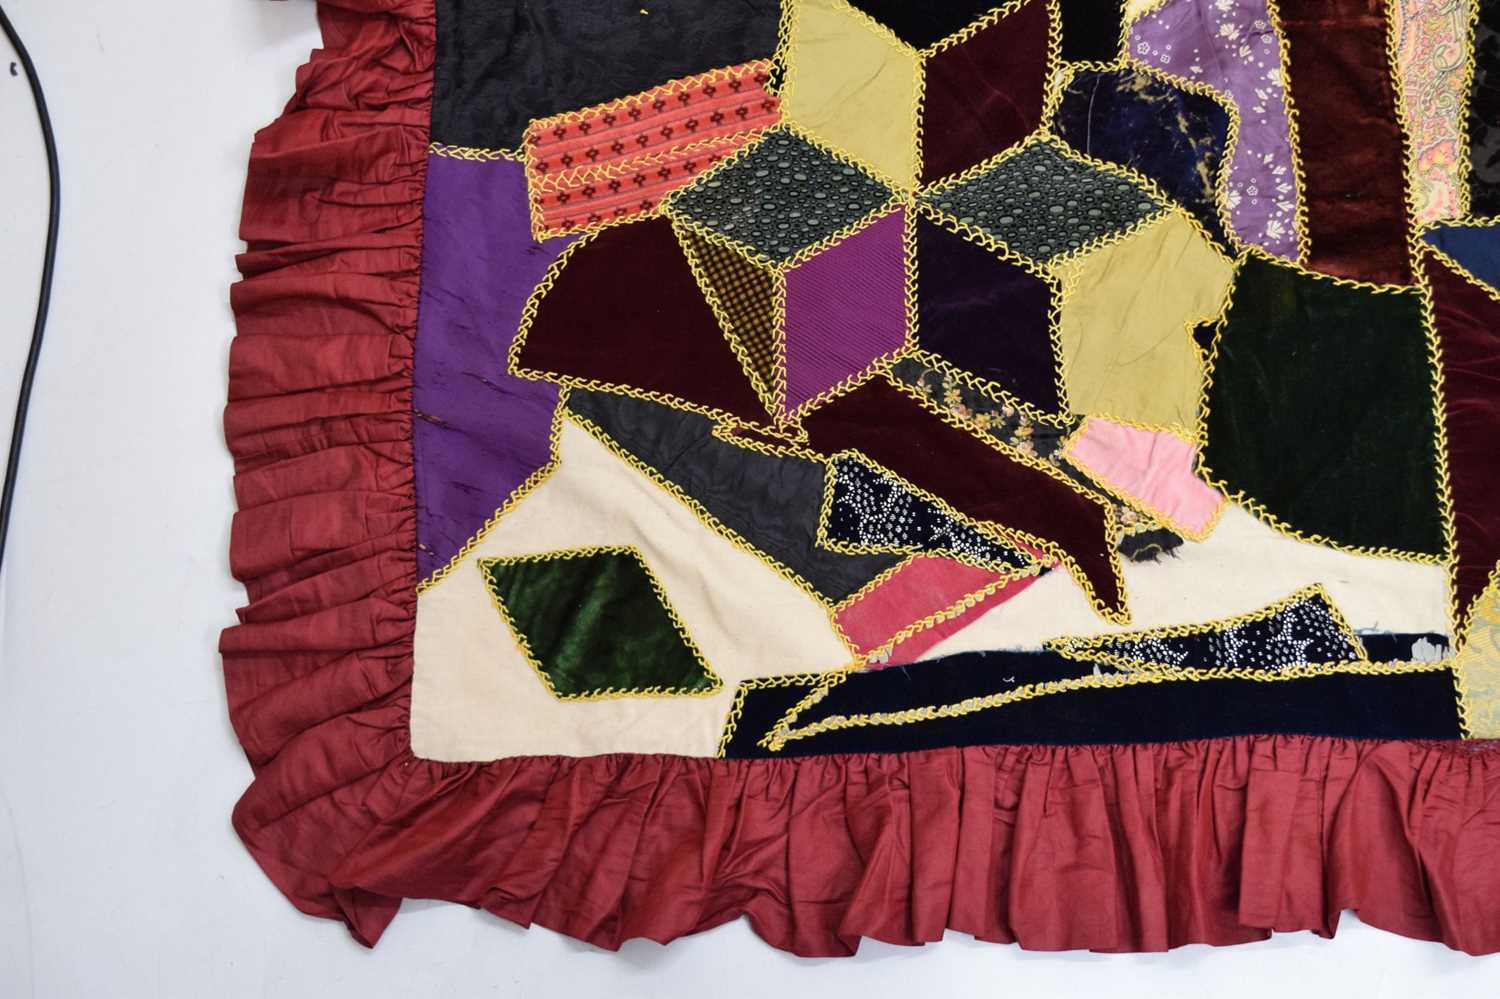 Late 19th/early 20th century patchwork quilt - Image 4 of 8